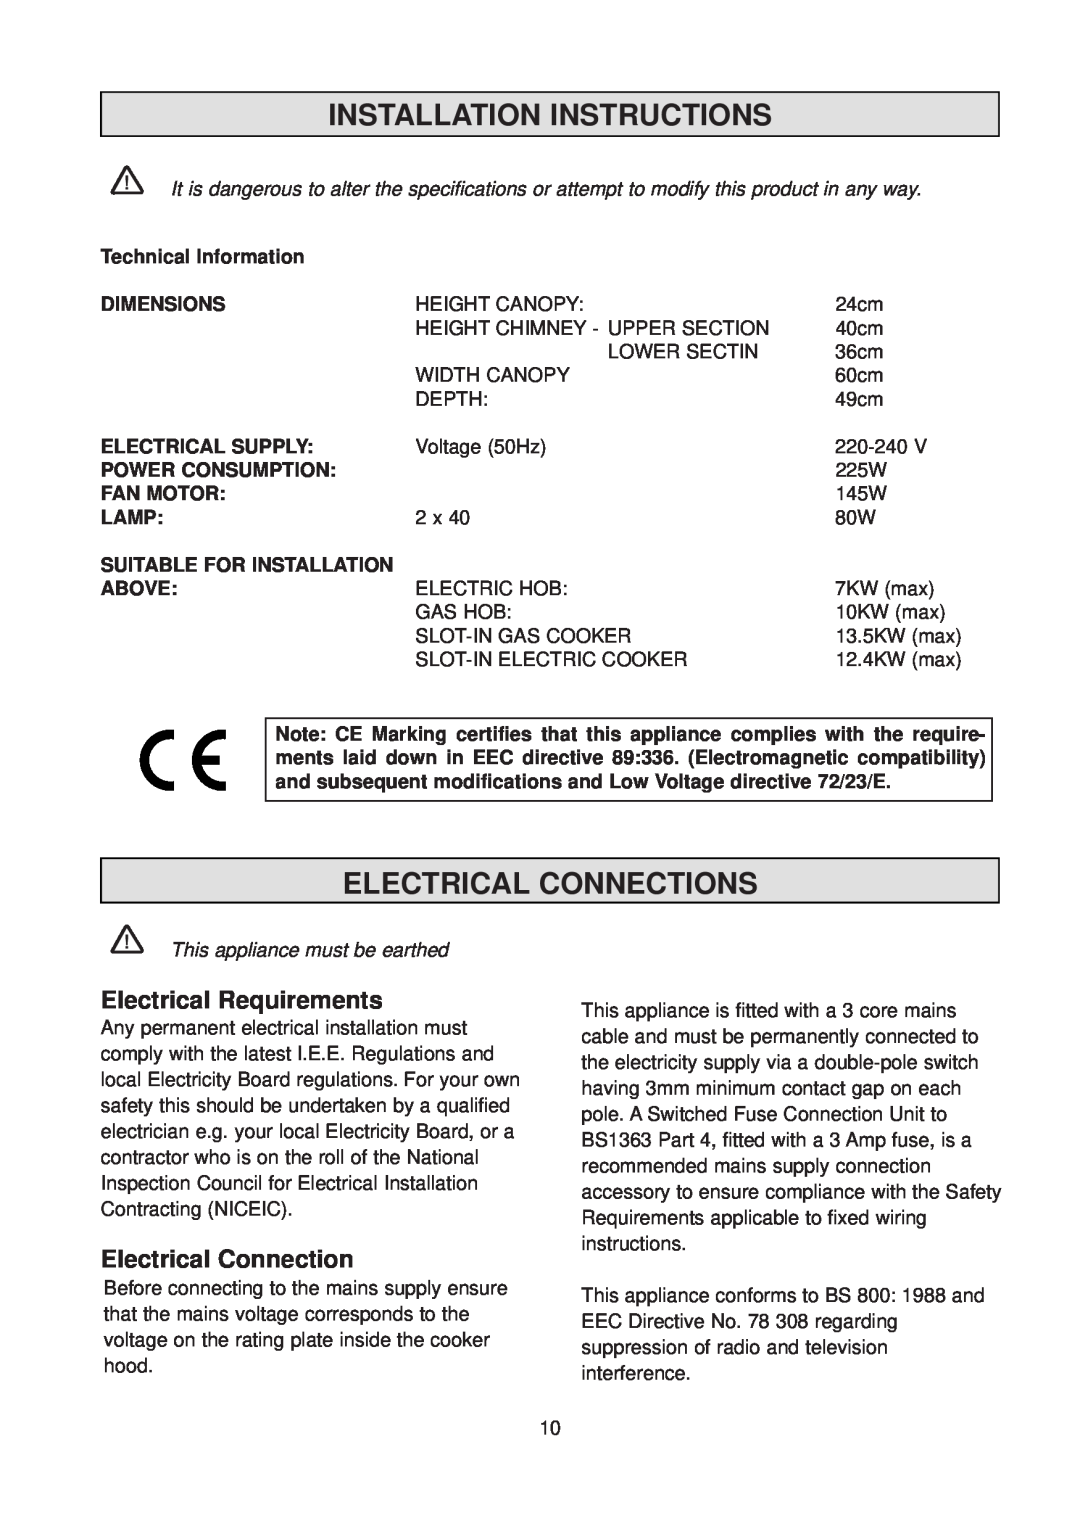 Electrolux EFC 630 Installation Instructions, Electrical Connections, Electrical Requirements, Technical Information, Lamp 